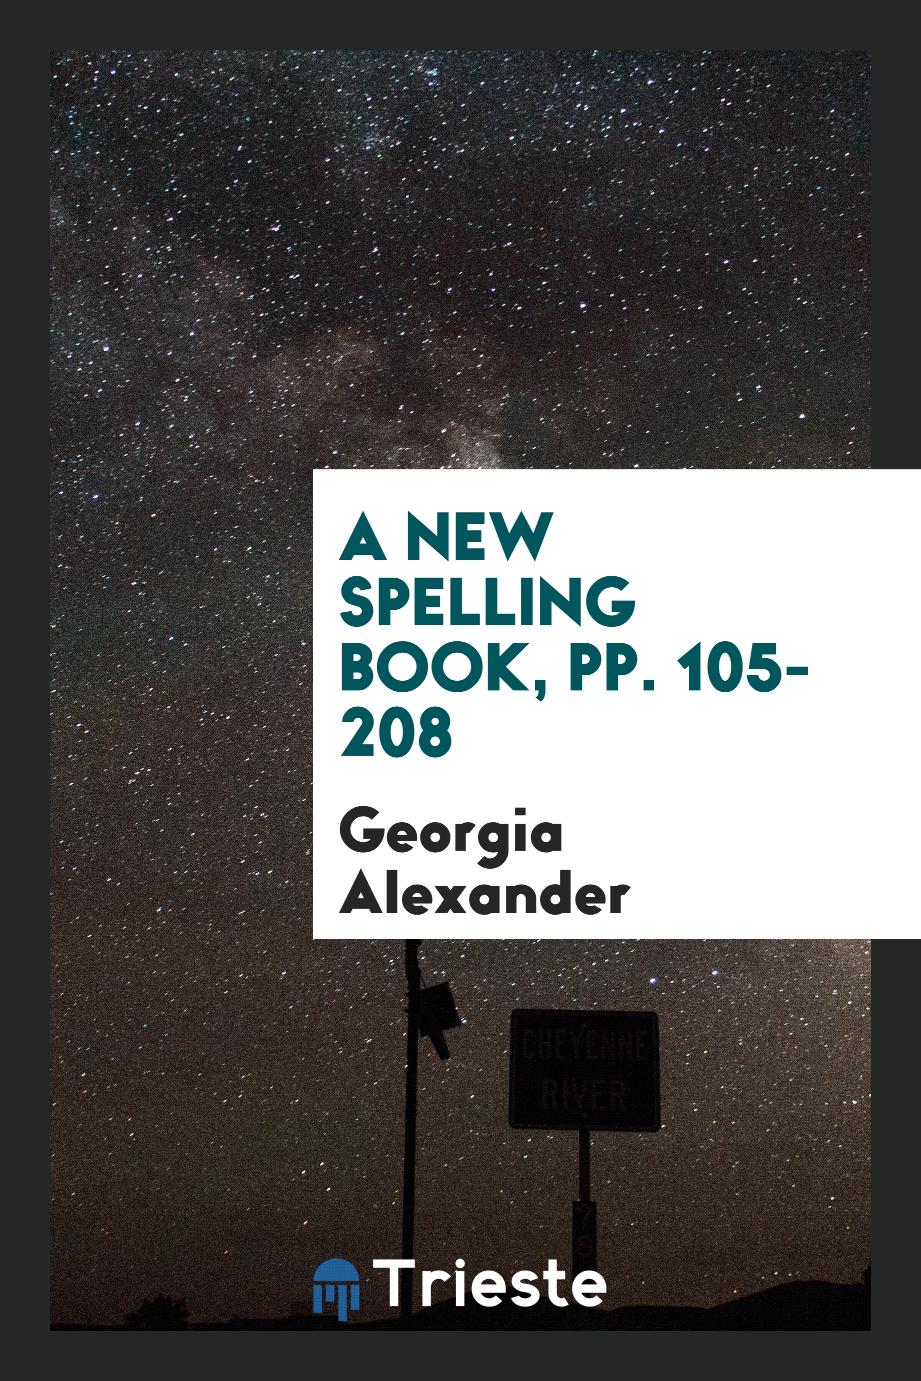 A New Spelling Book, pp. 105-208